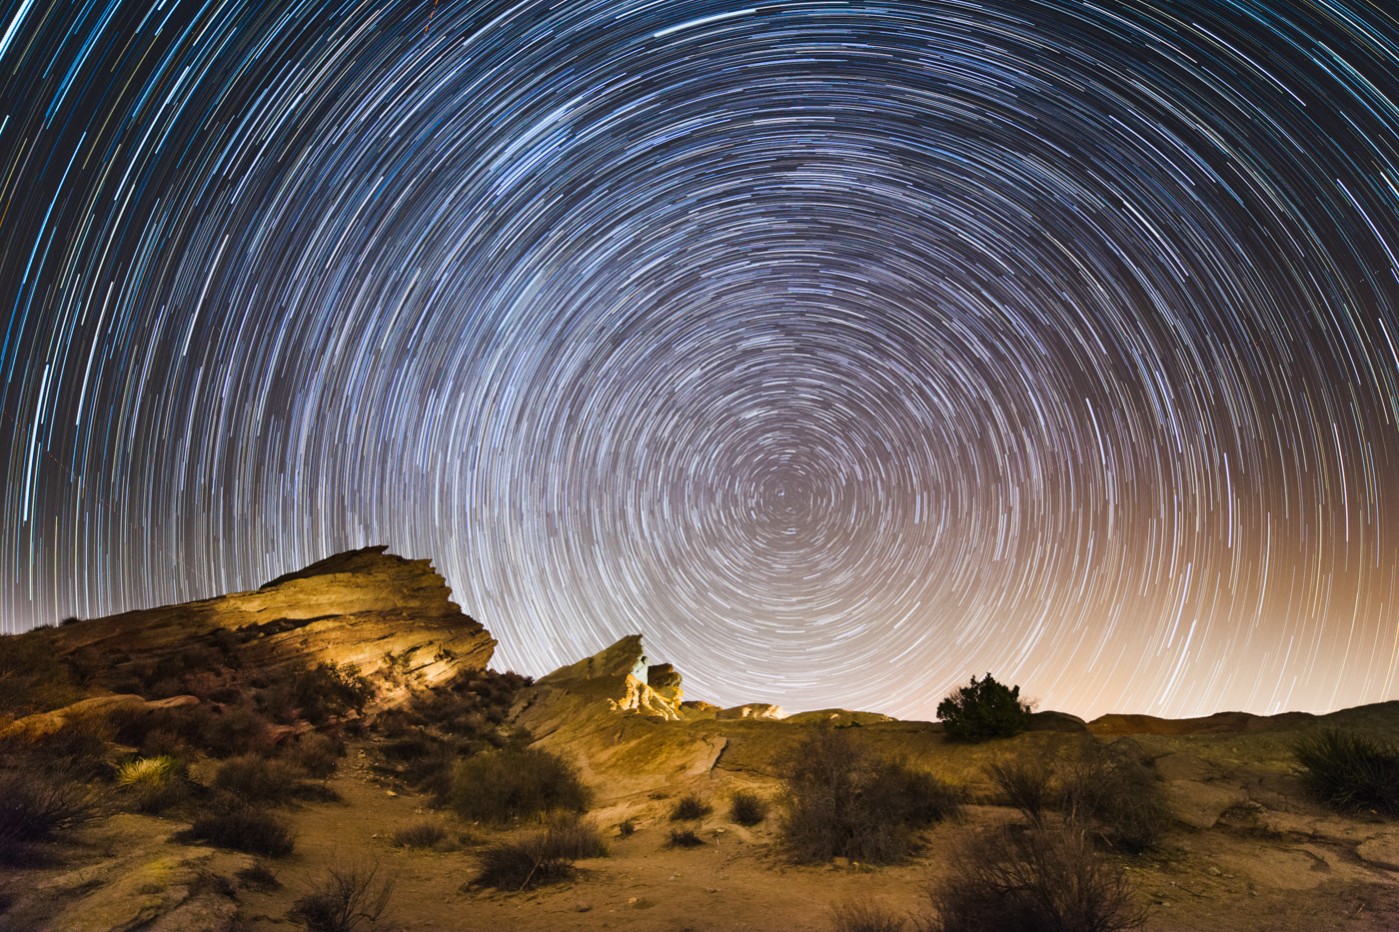 Star Trails with an Intervalometer